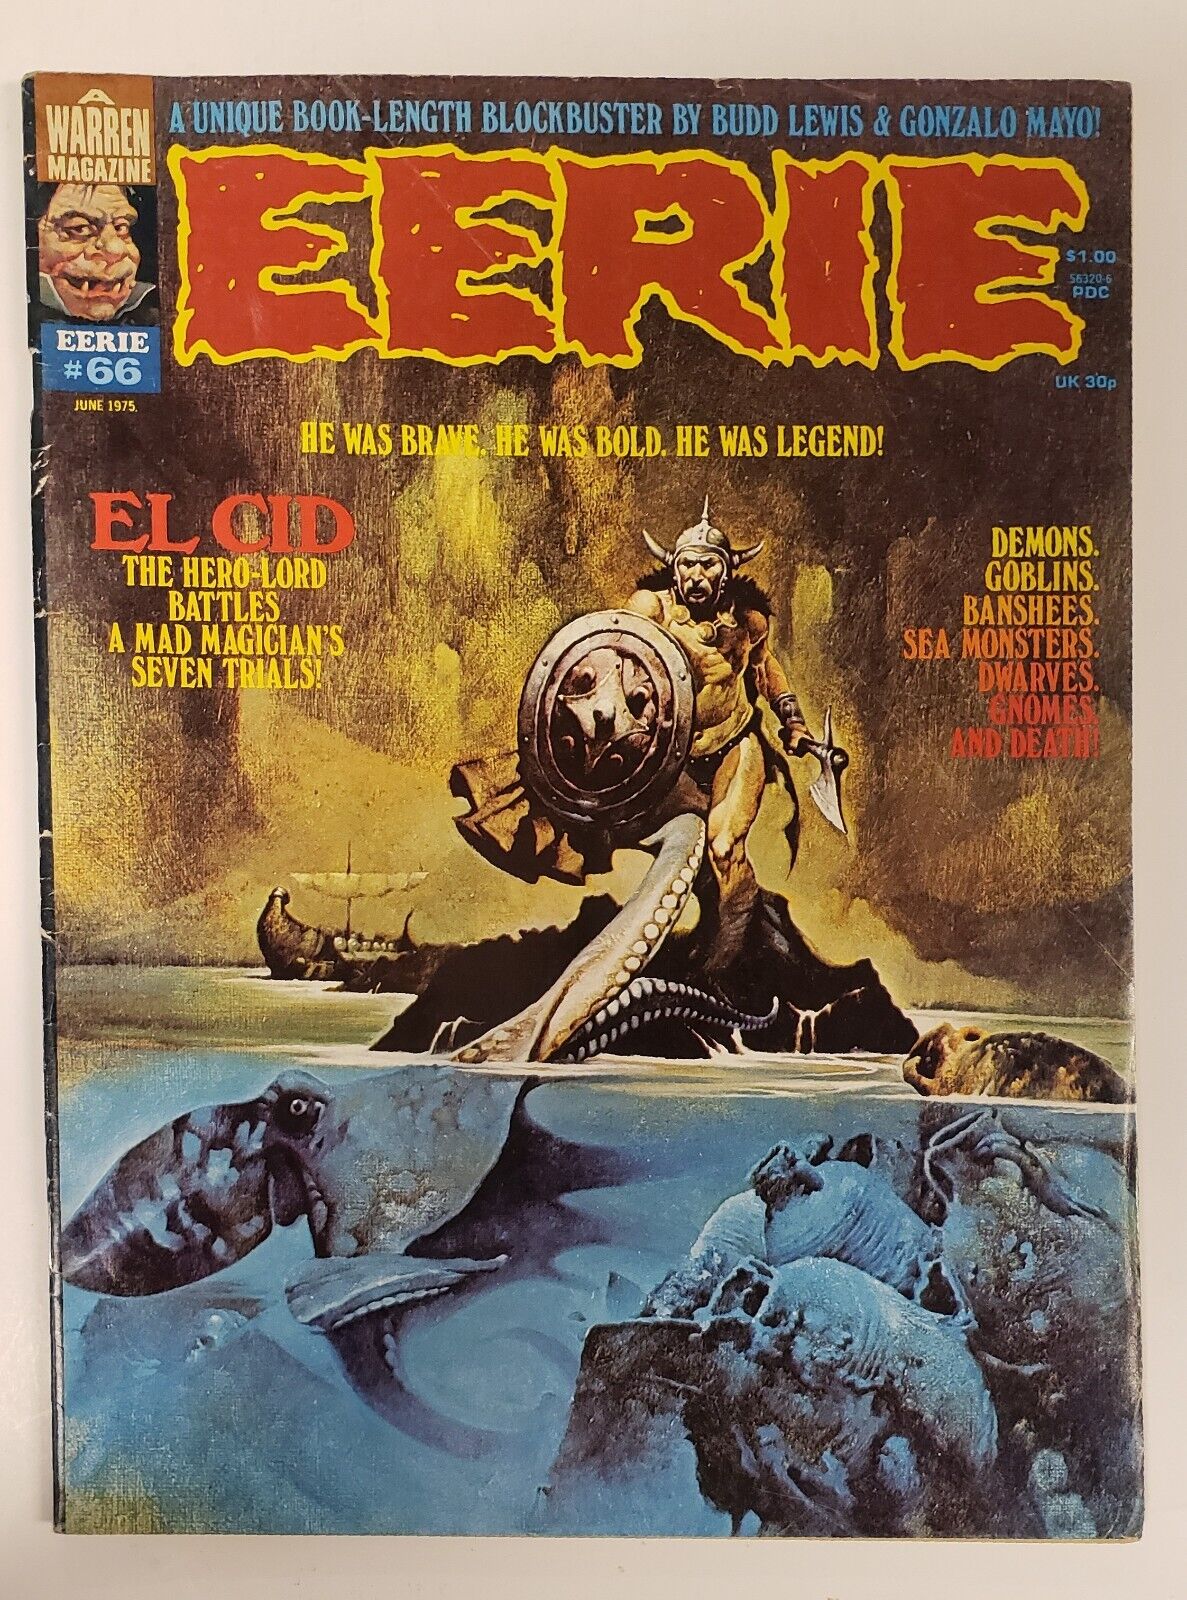 Vintage Eerie Magazines,  $10 to $30. Your Choice, Priced Individually, As Is.  